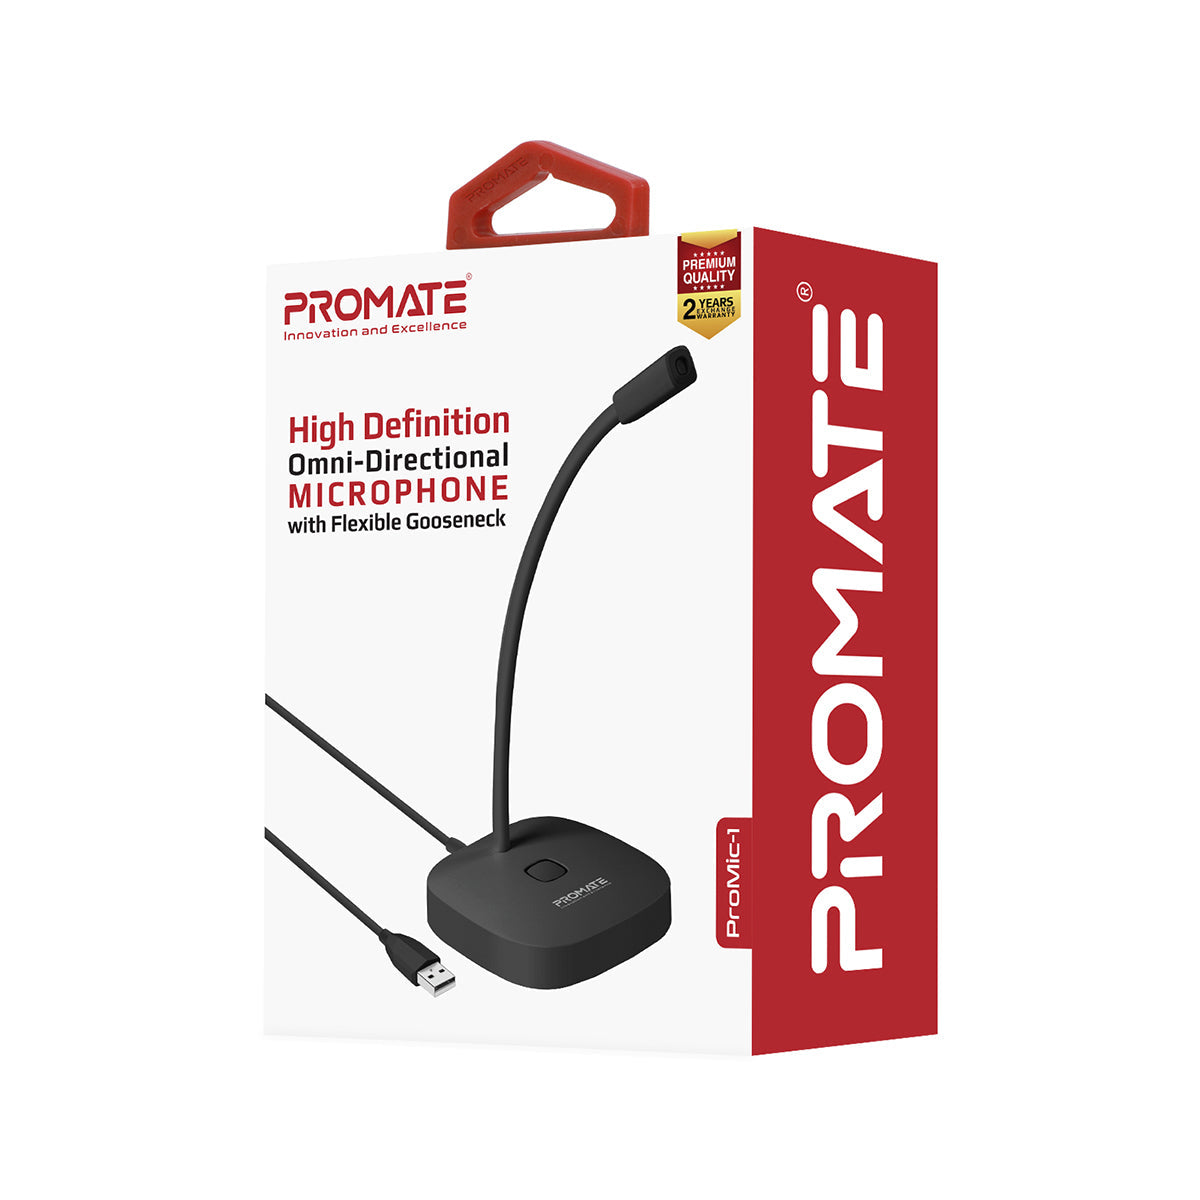 Promate USB Desktop Microphone, High Definition Omni-Directional USB Microphone with Flexible Gooseneck, Mute Touch Button, LED Indicator and Built-In Anti-Tangle Cord for PC, Laptop, Recording, Gaming, ProMic-1